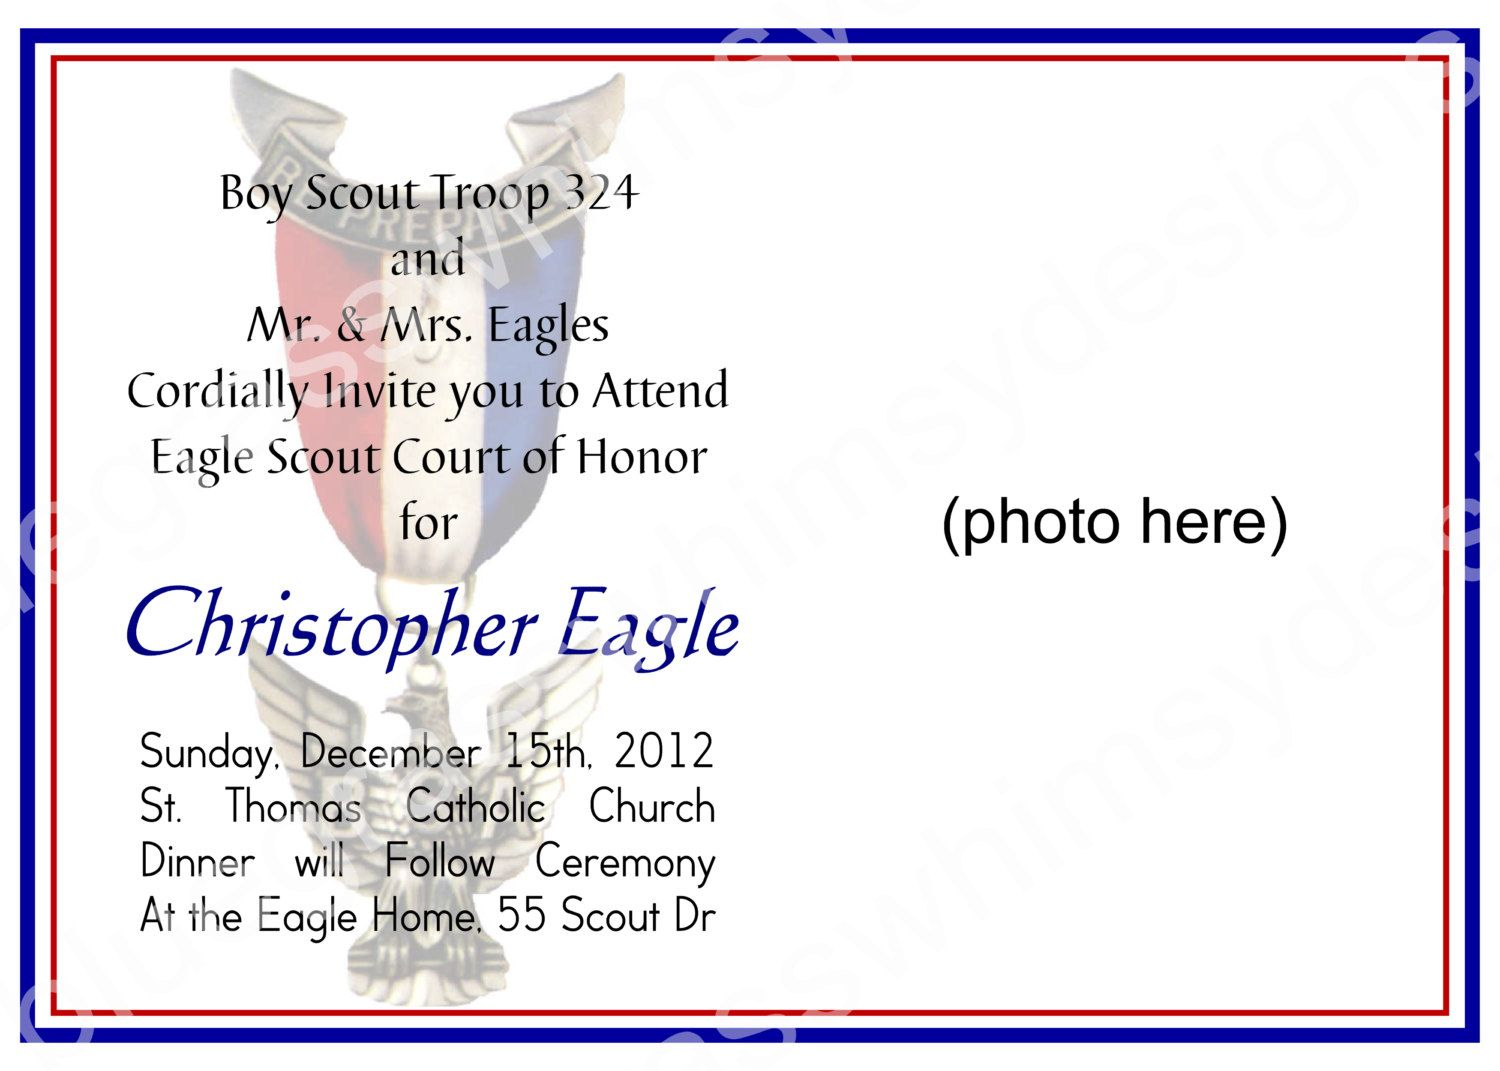 Boy Scout Print Out Yahoo Image Search Results Eagle Scouts St intended for dimensions 1500 X 1071